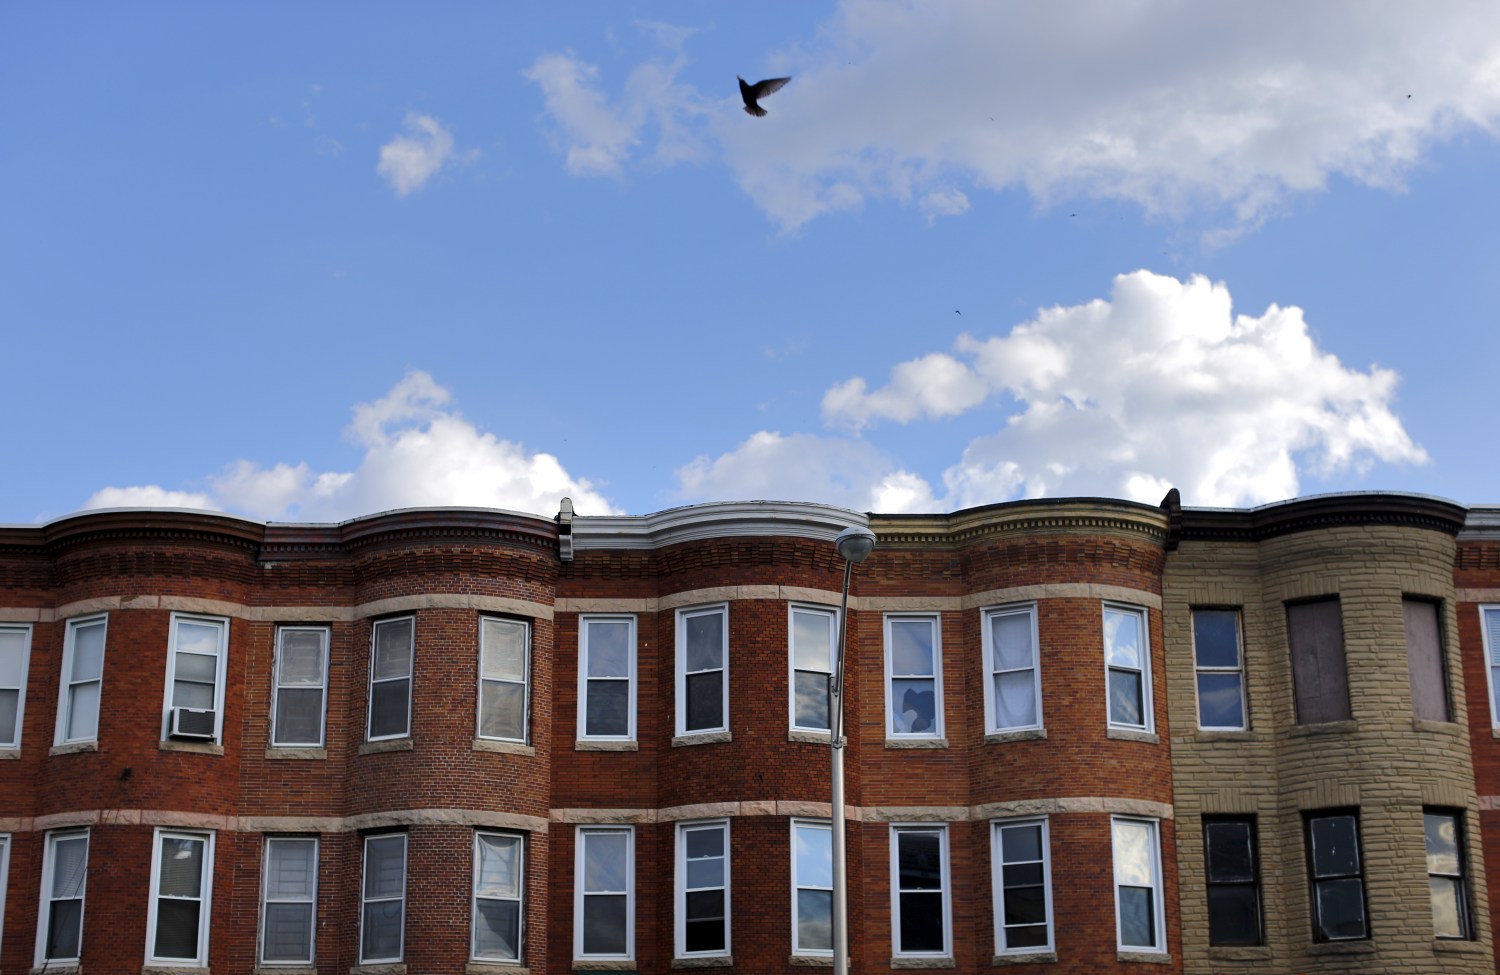 A bird flies over an apartment building along North Avenue in Baltimore, Maryland May 2, 2015. Thousands of people took to the streets of Baltimore on Saturday as anger over the death of young black man Freddie Gray turned to hopes for change following swift criminal charges against six police officers. REUTERS/Carlos Barria - GF10000082067